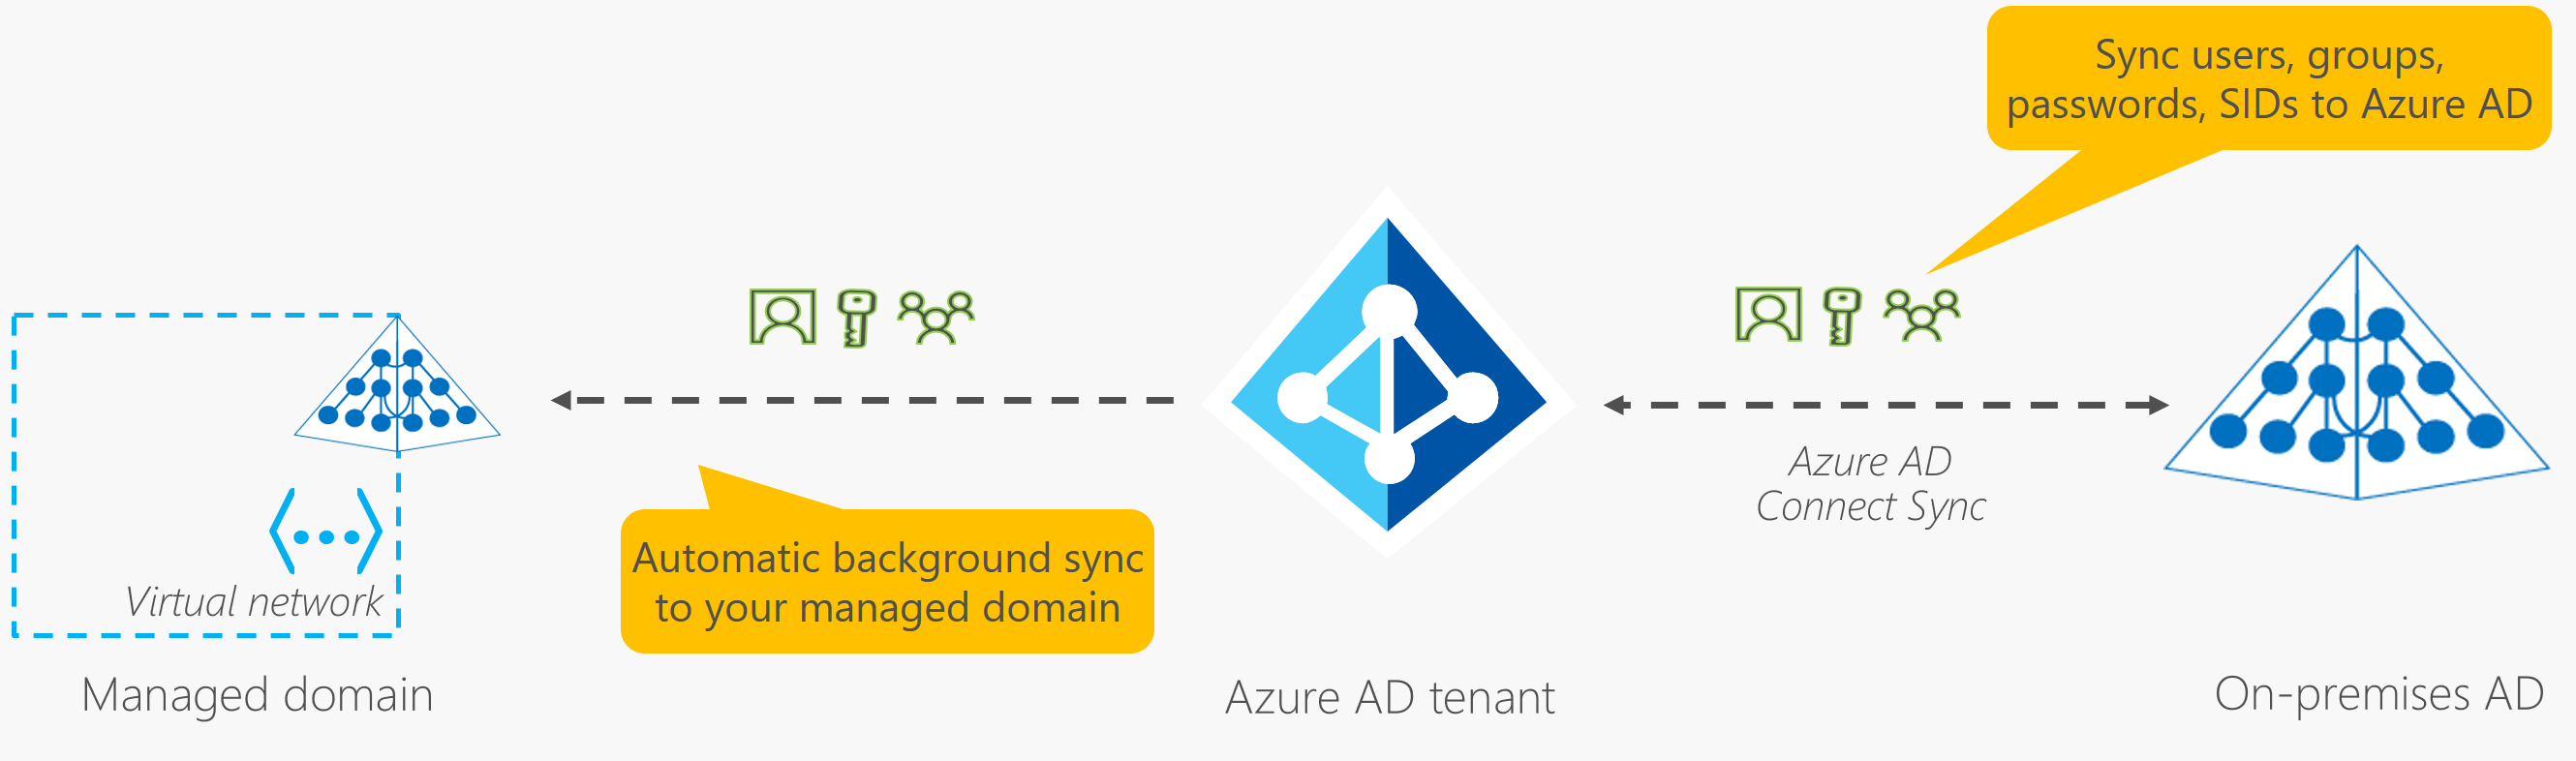 Synchronization overview for an Azure AD Domain Services managed domain